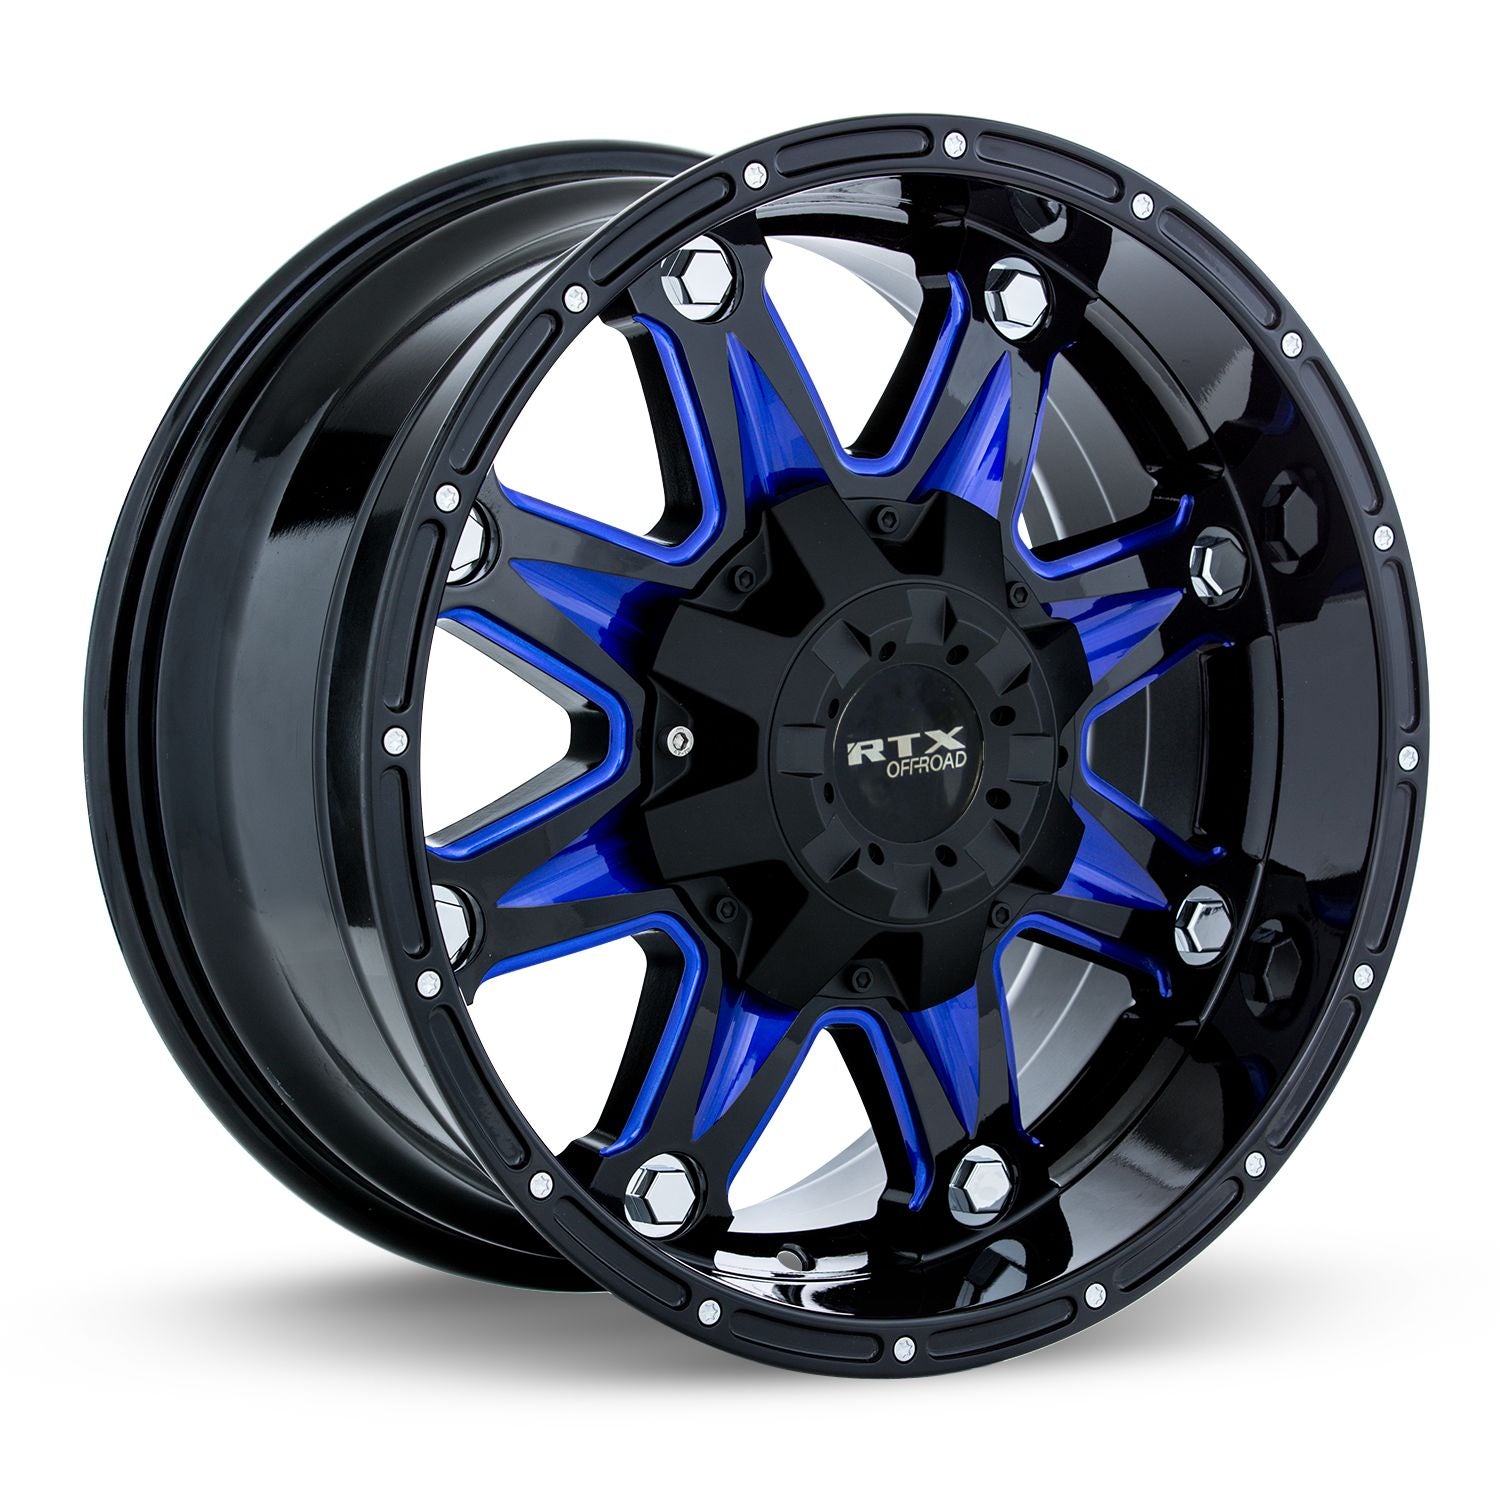 Spine • Black with Milled Blue Spokes • 20x9 6x135/139.7 ET10 CB87.1